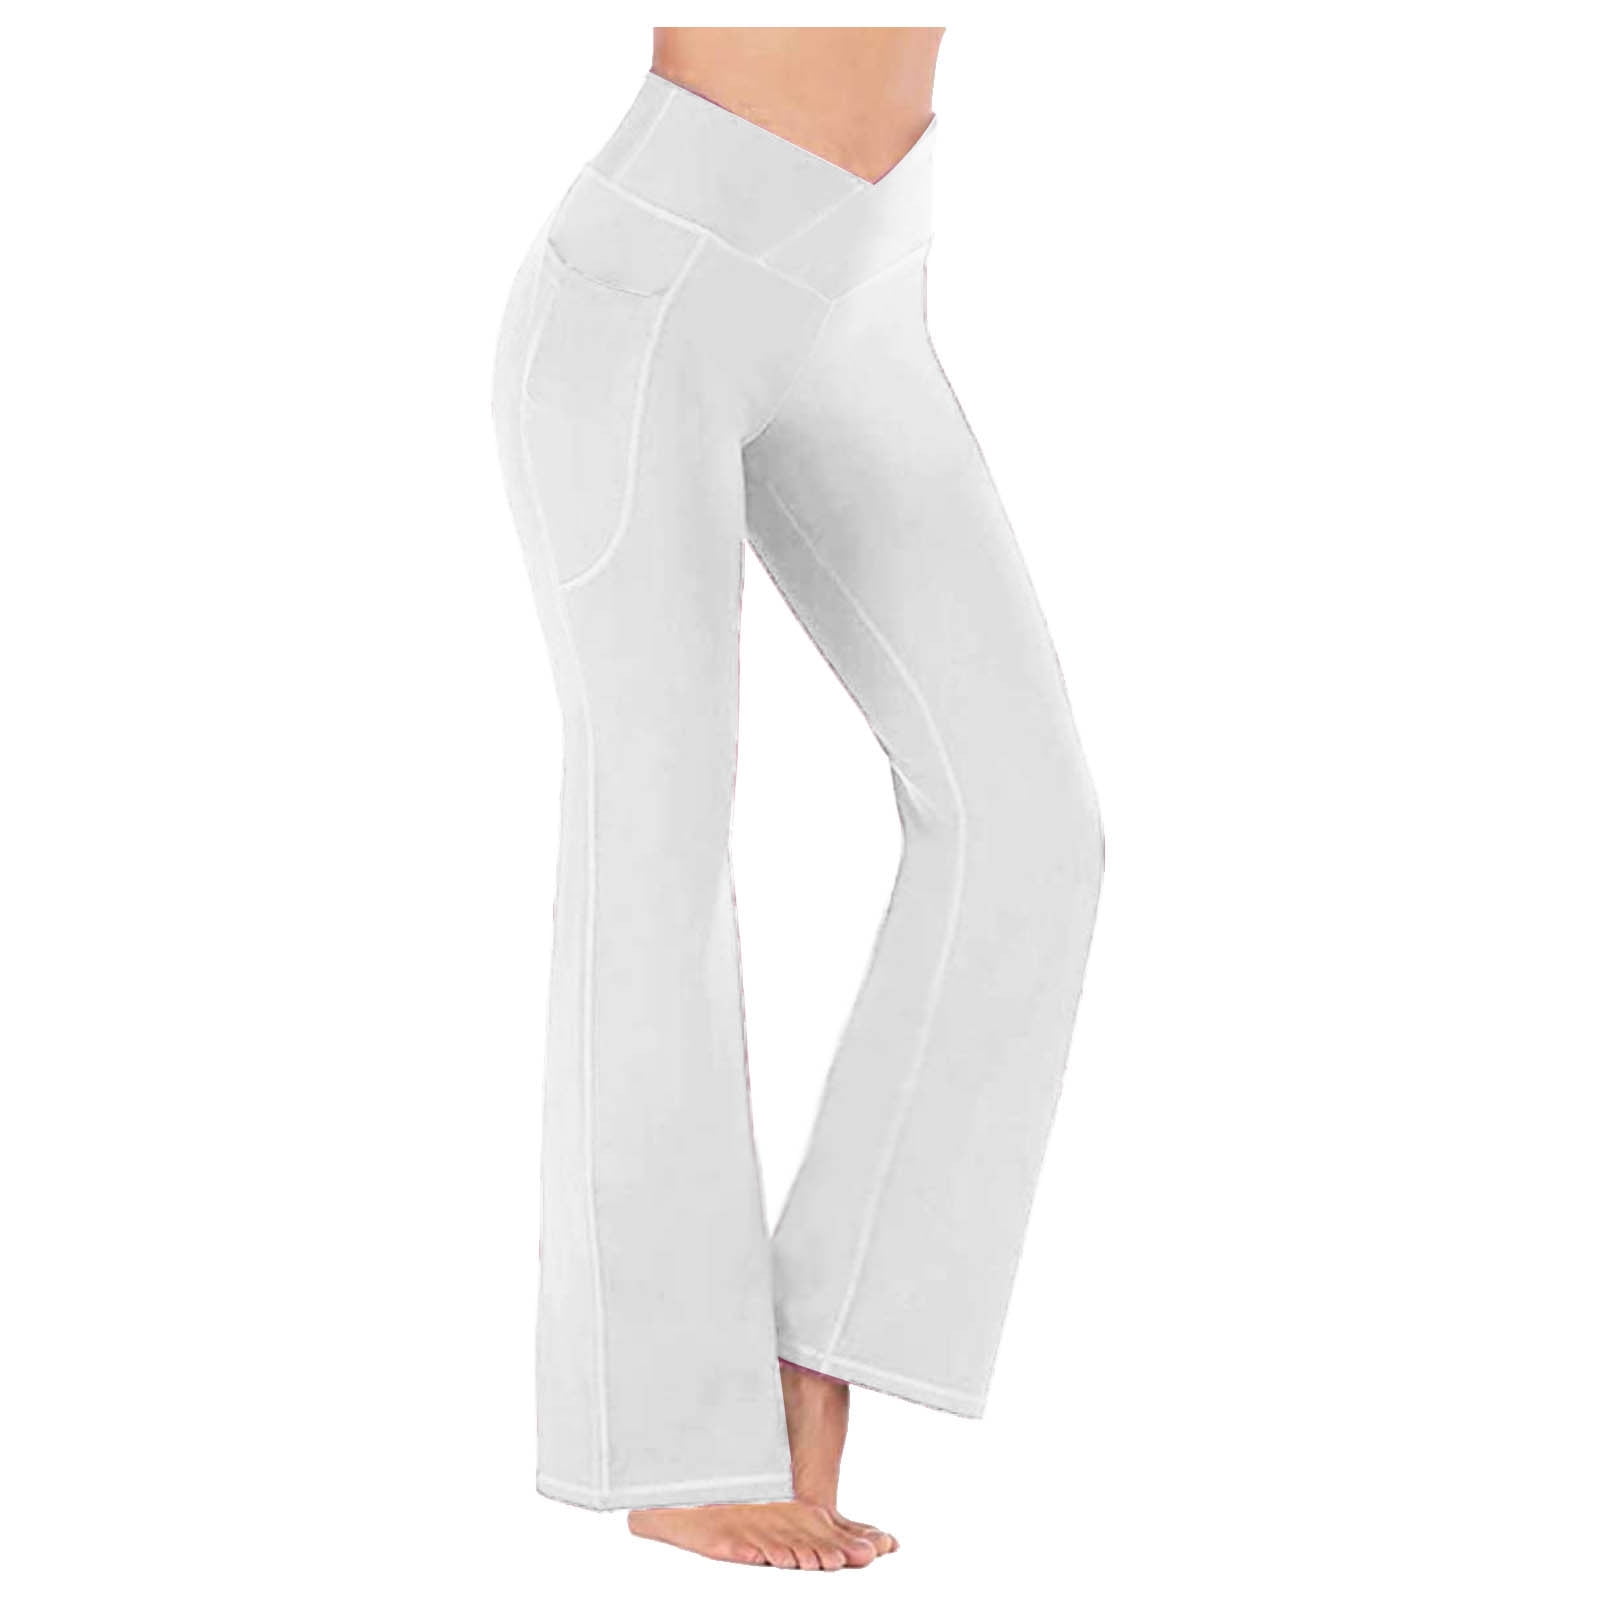 XFLWAM Flare Leggings for Women Crossover High Waisted Yoga Pants Casual  Bootcut Workout Bell Bottom Leggings with Pockets White M 